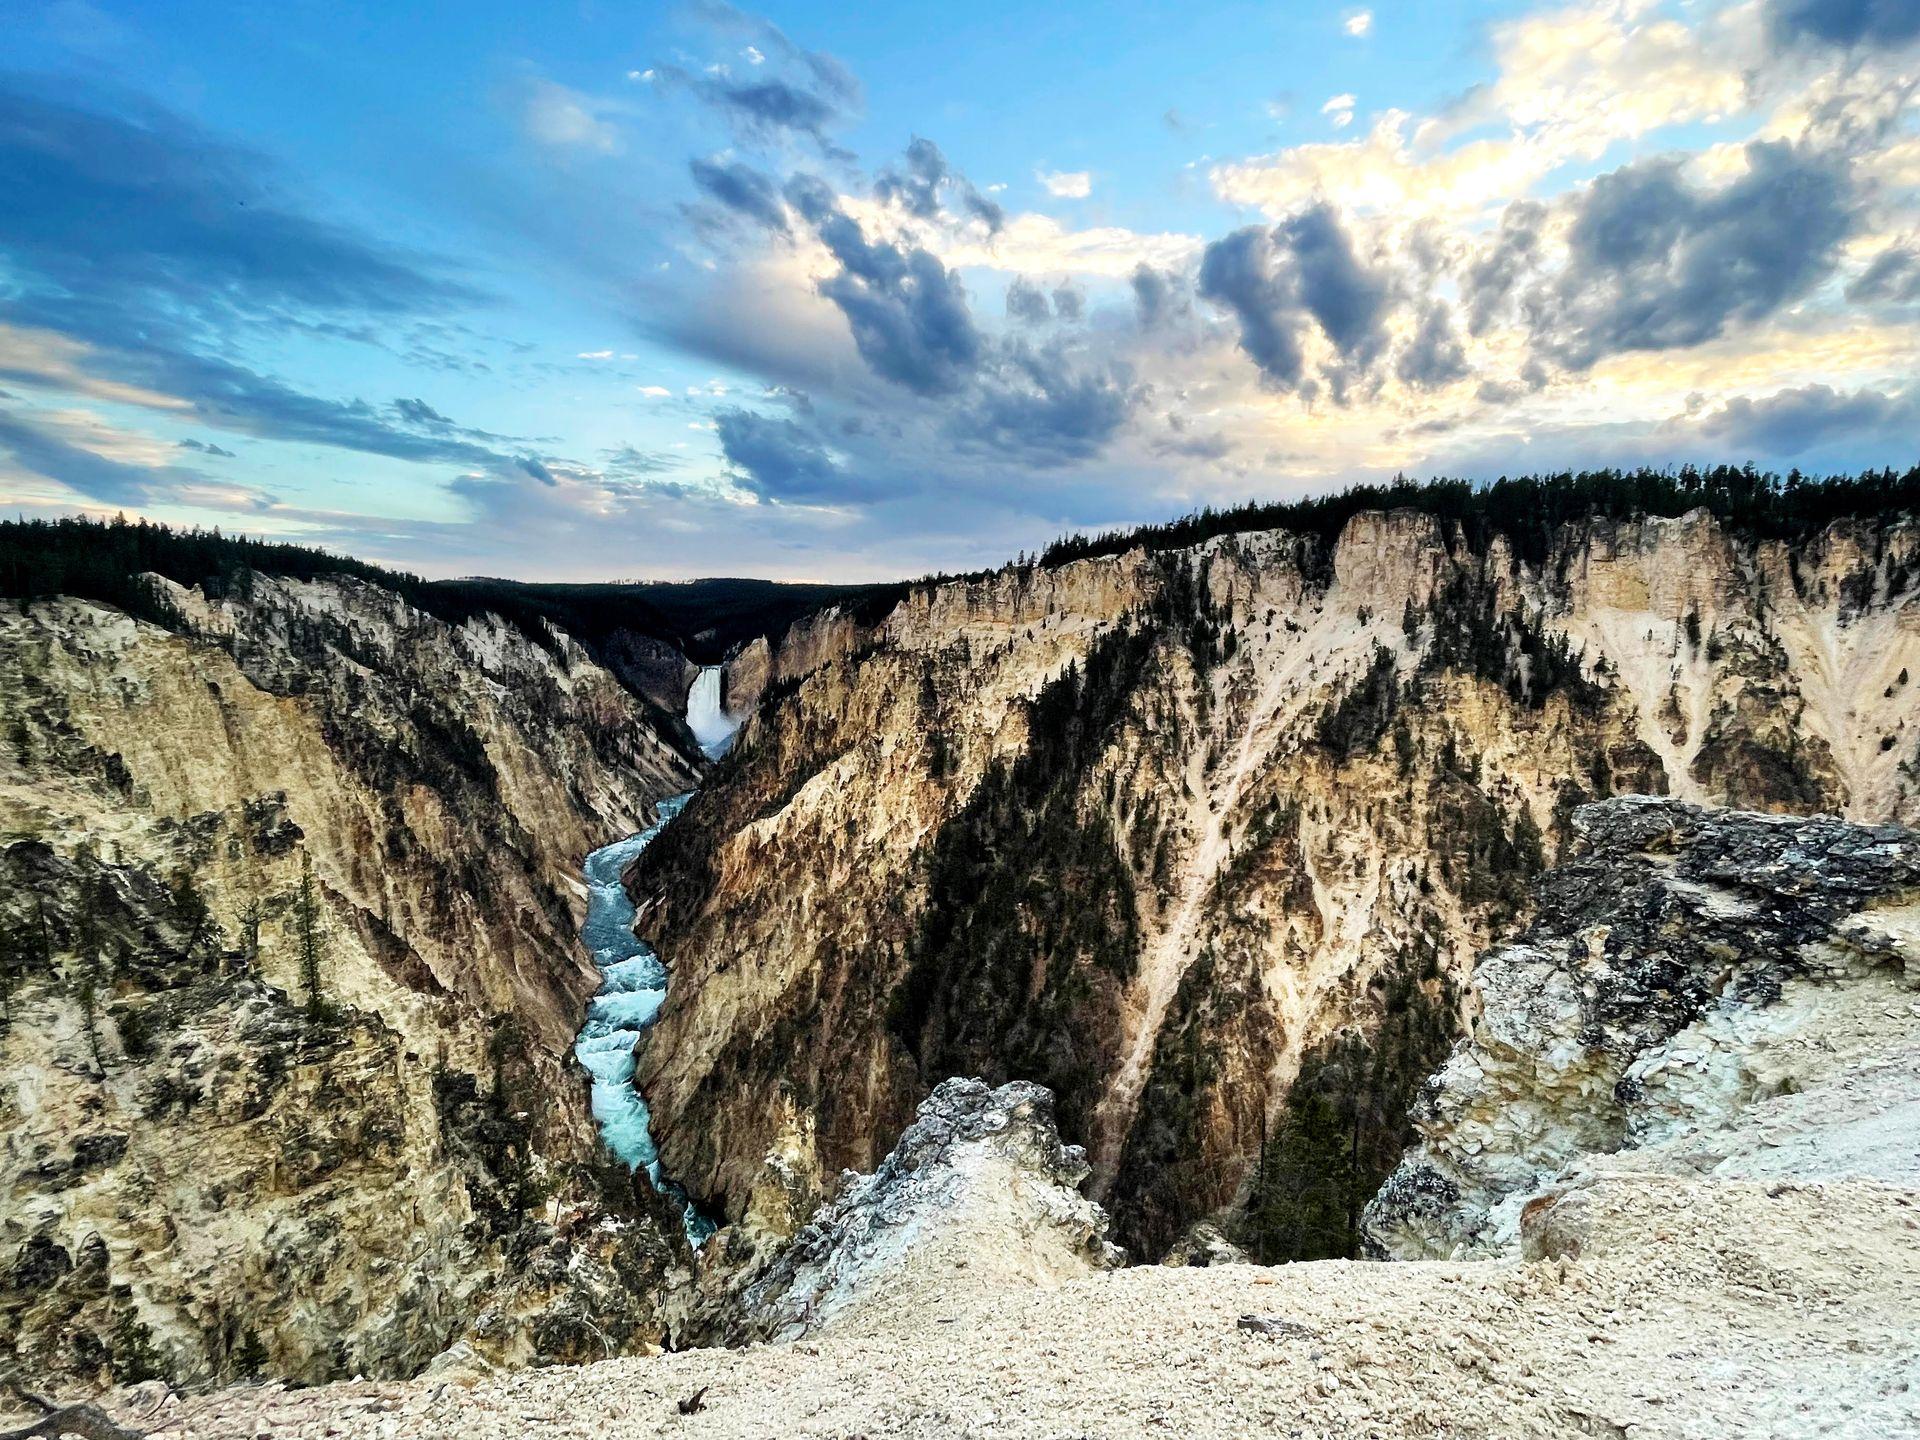 The view of the Grand Canyon of the Yellowstone from Artist's Point near sunset.